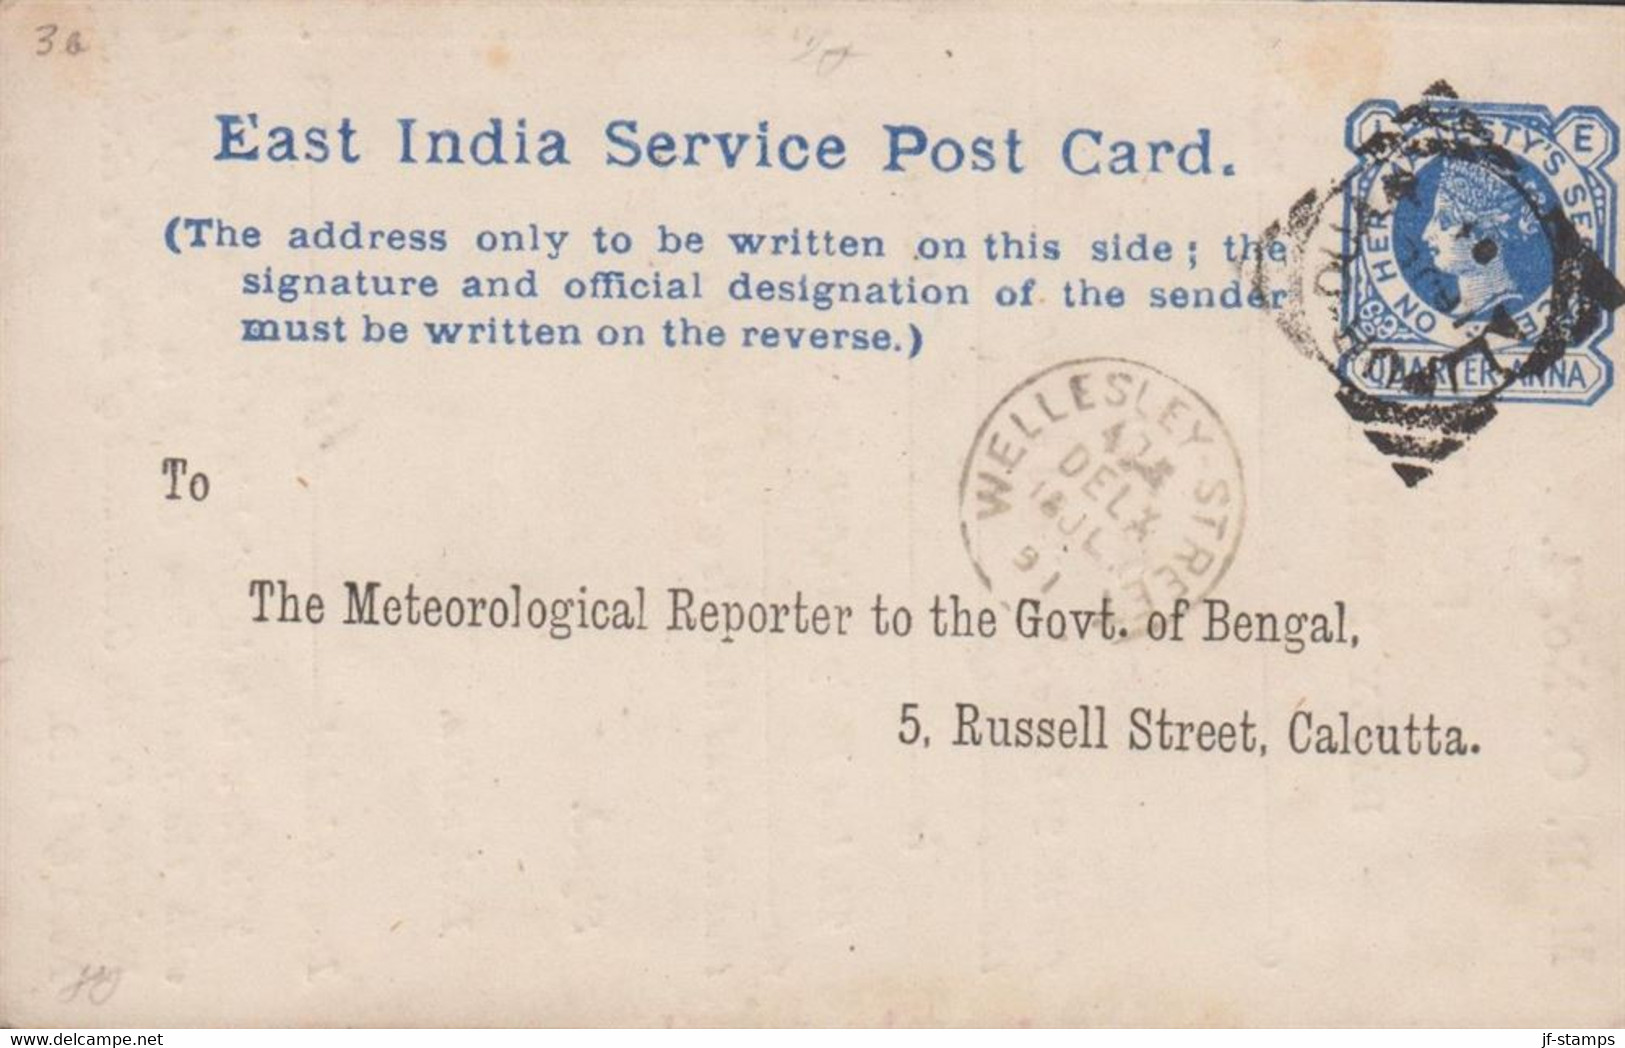 1891. EAST INDIA. Service POST CARD VICTORIA QUARTER ANNA FORM C DAILY RAINFALL REPORT Cancelled WELLESLEY... - JF427554 - Chamba